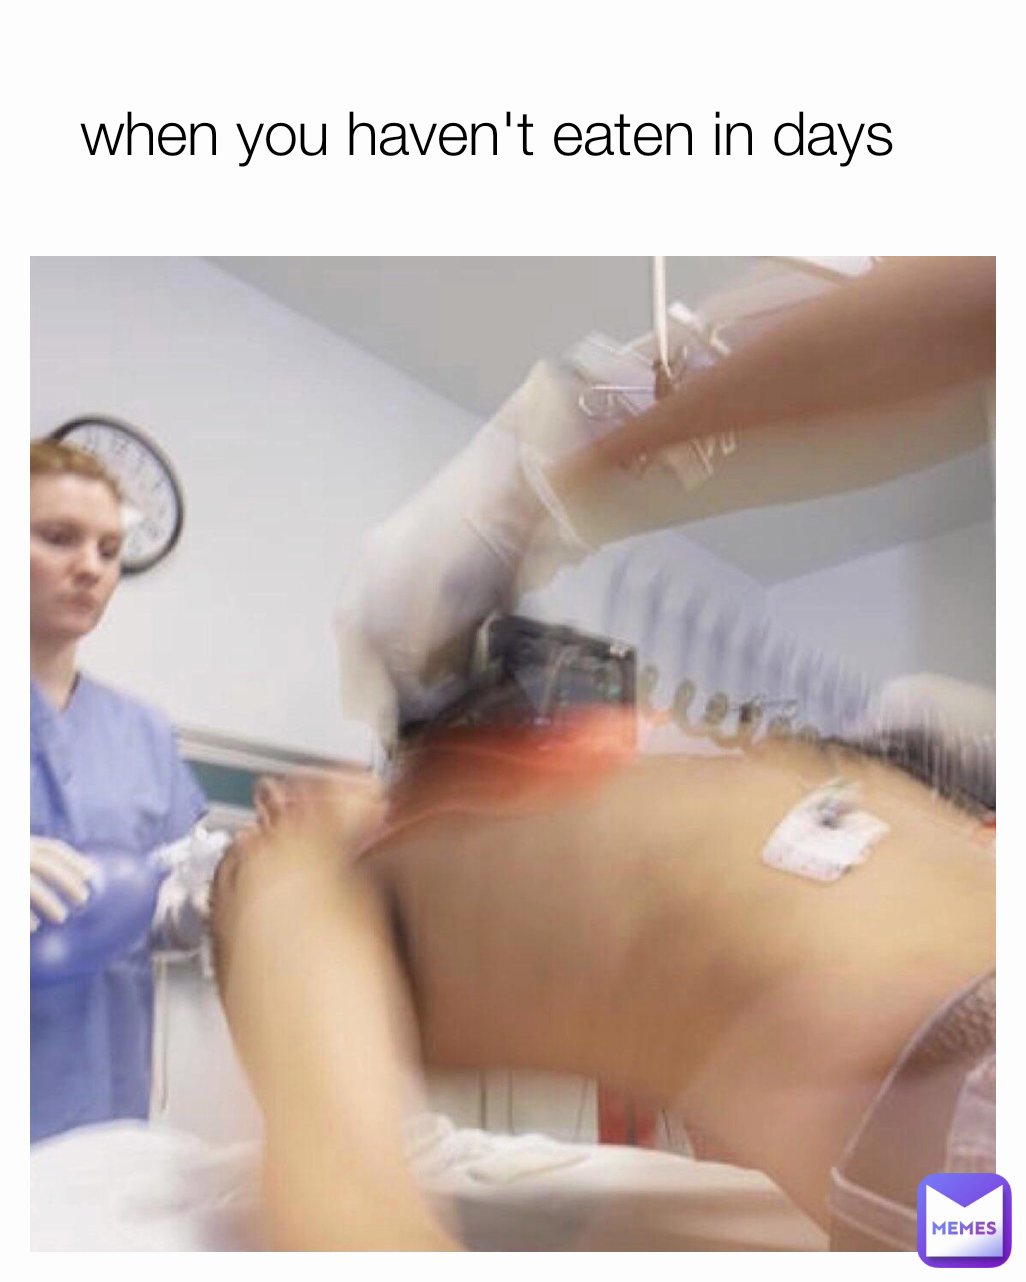 when you haven't eaten in days